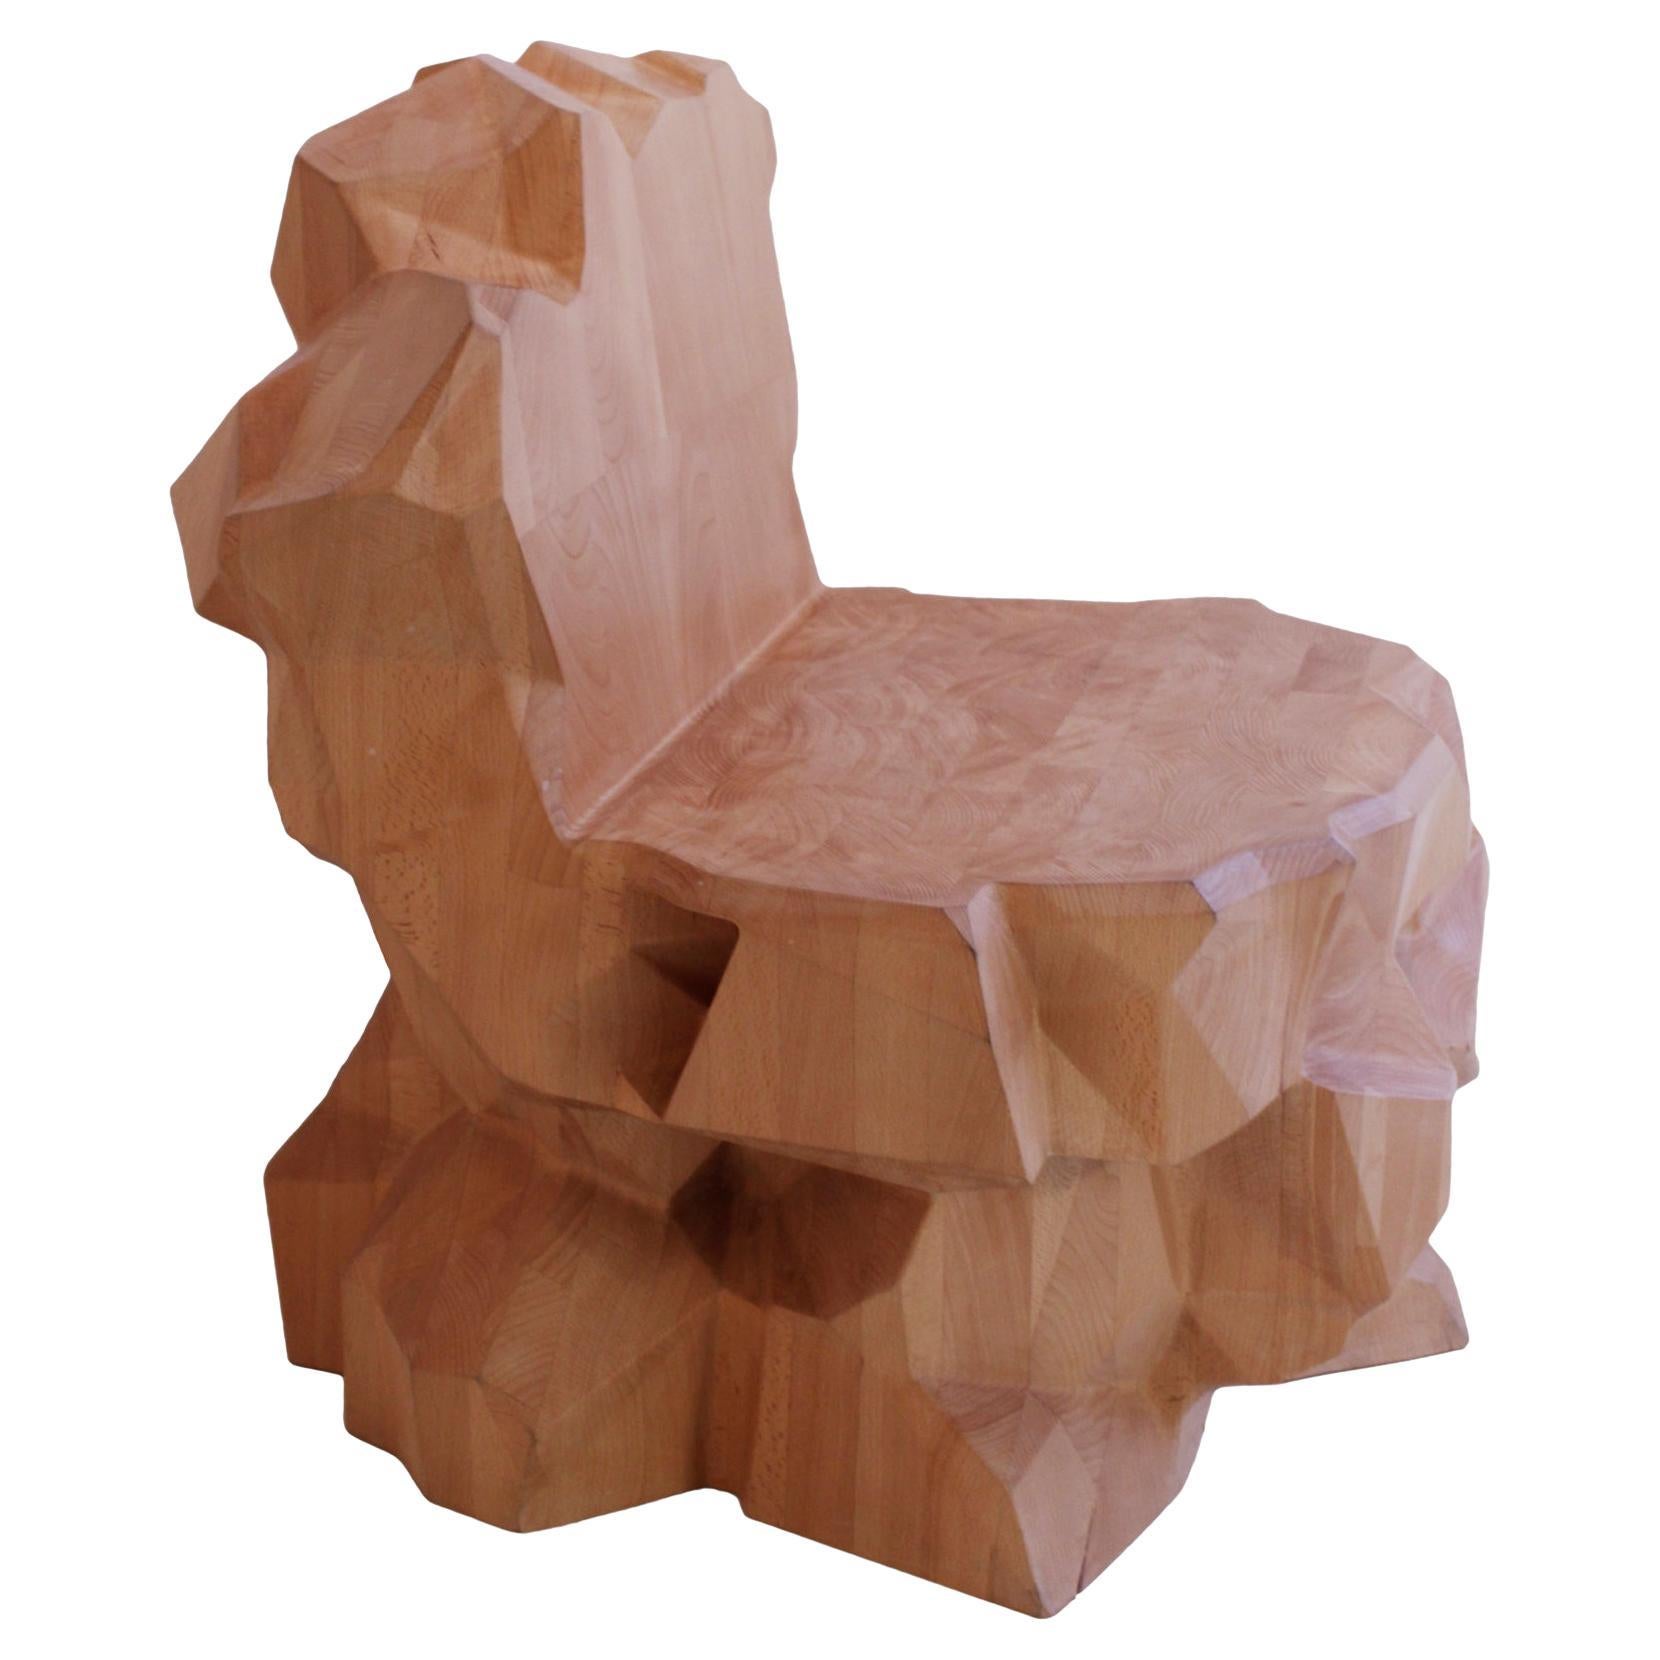 "Mineral" Faceted Sculptural Chair in Wood by Dagoberto Rodriguez For Sale